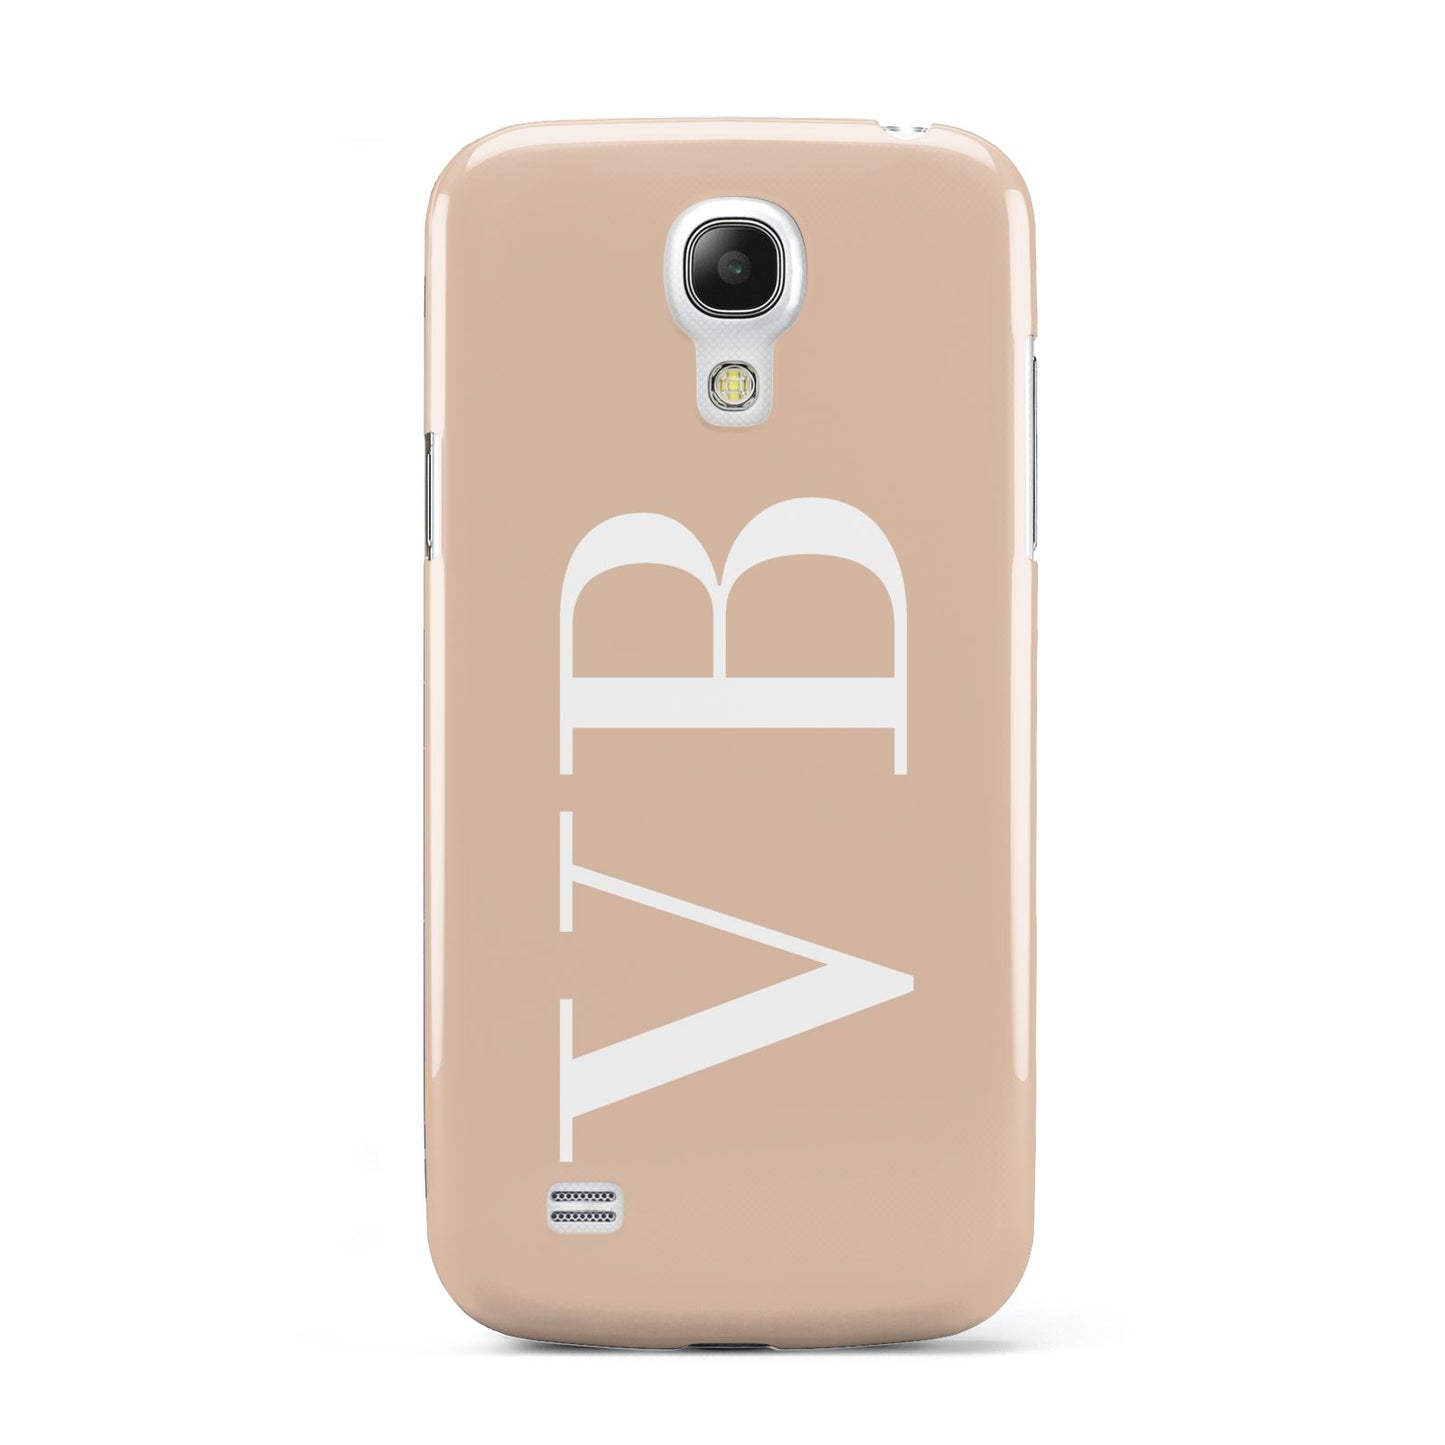 Nude And White Personalised Samsung Galaxy S4 Mini Case